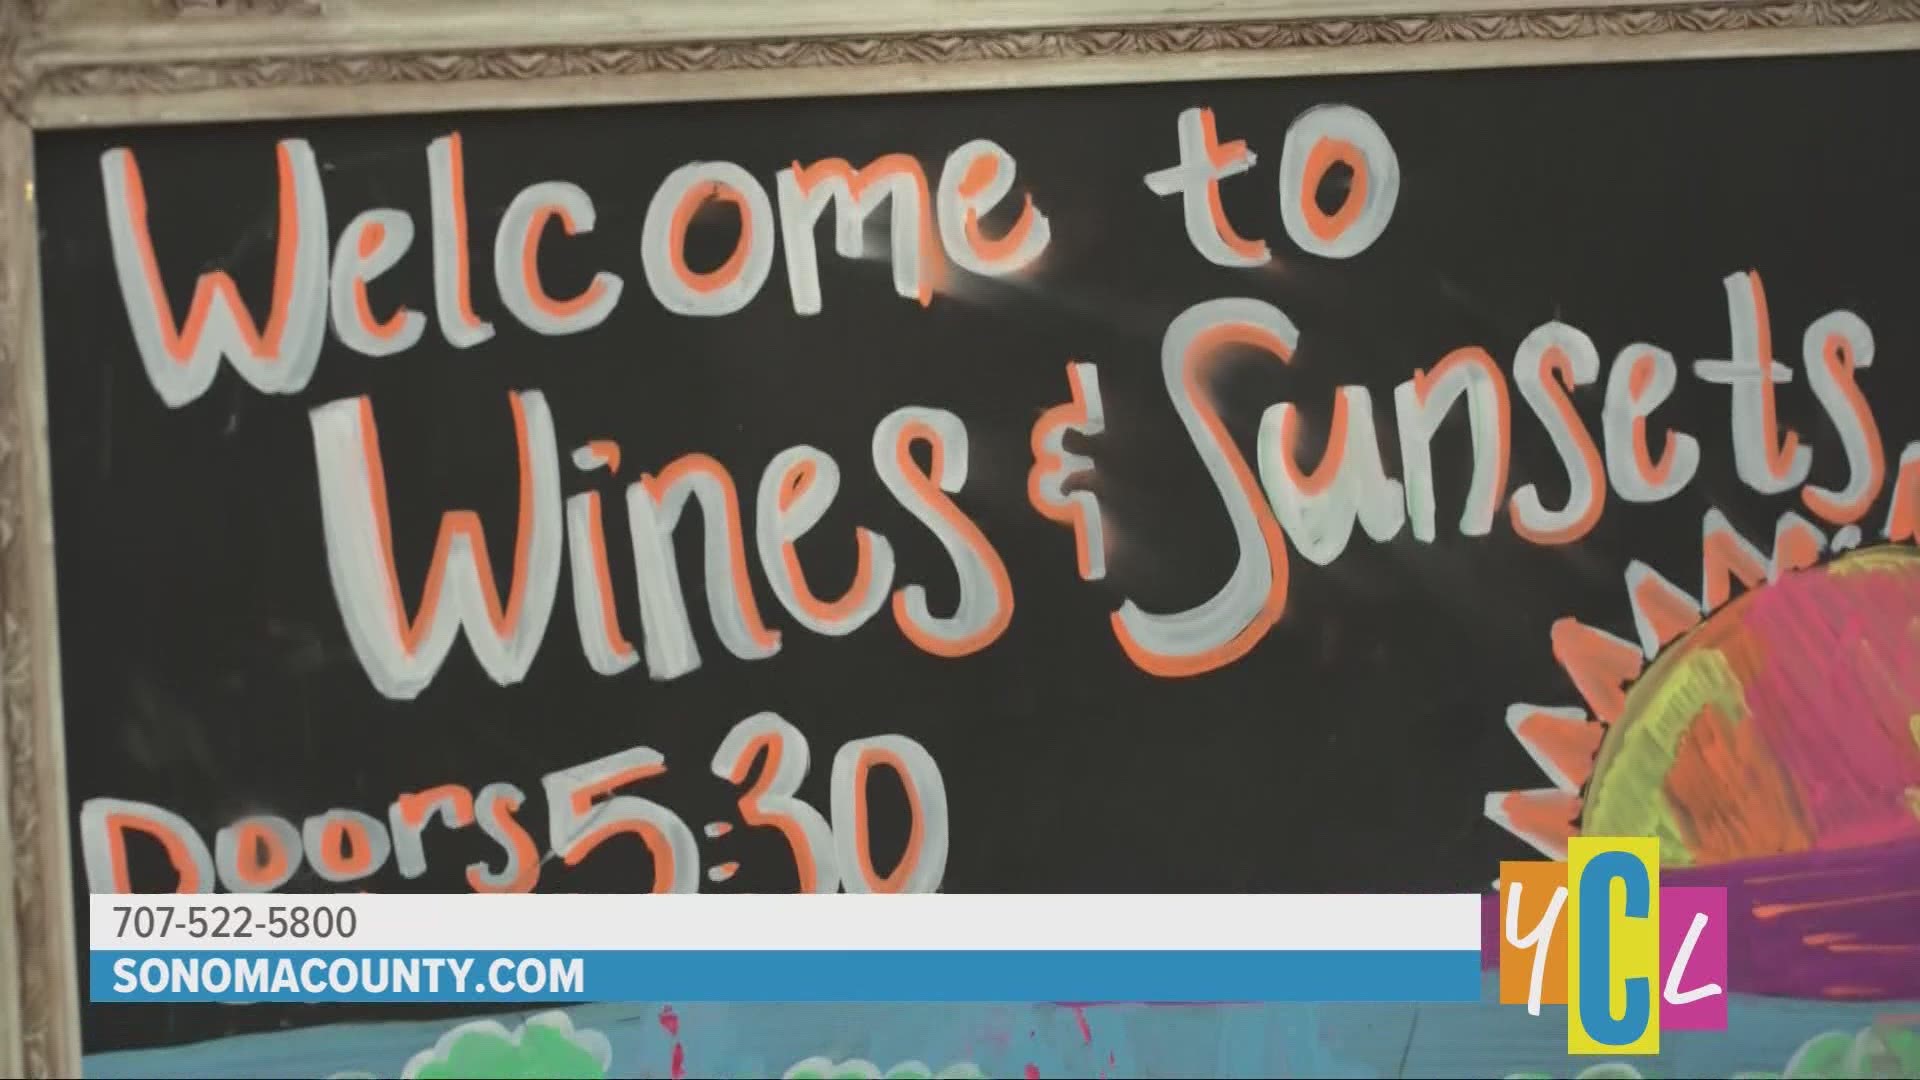 Details on the thriving culinary scene in Sonoma County and visiting one of their 425 scenic wineries! This segment was paid for by Sonoma County Tourism.